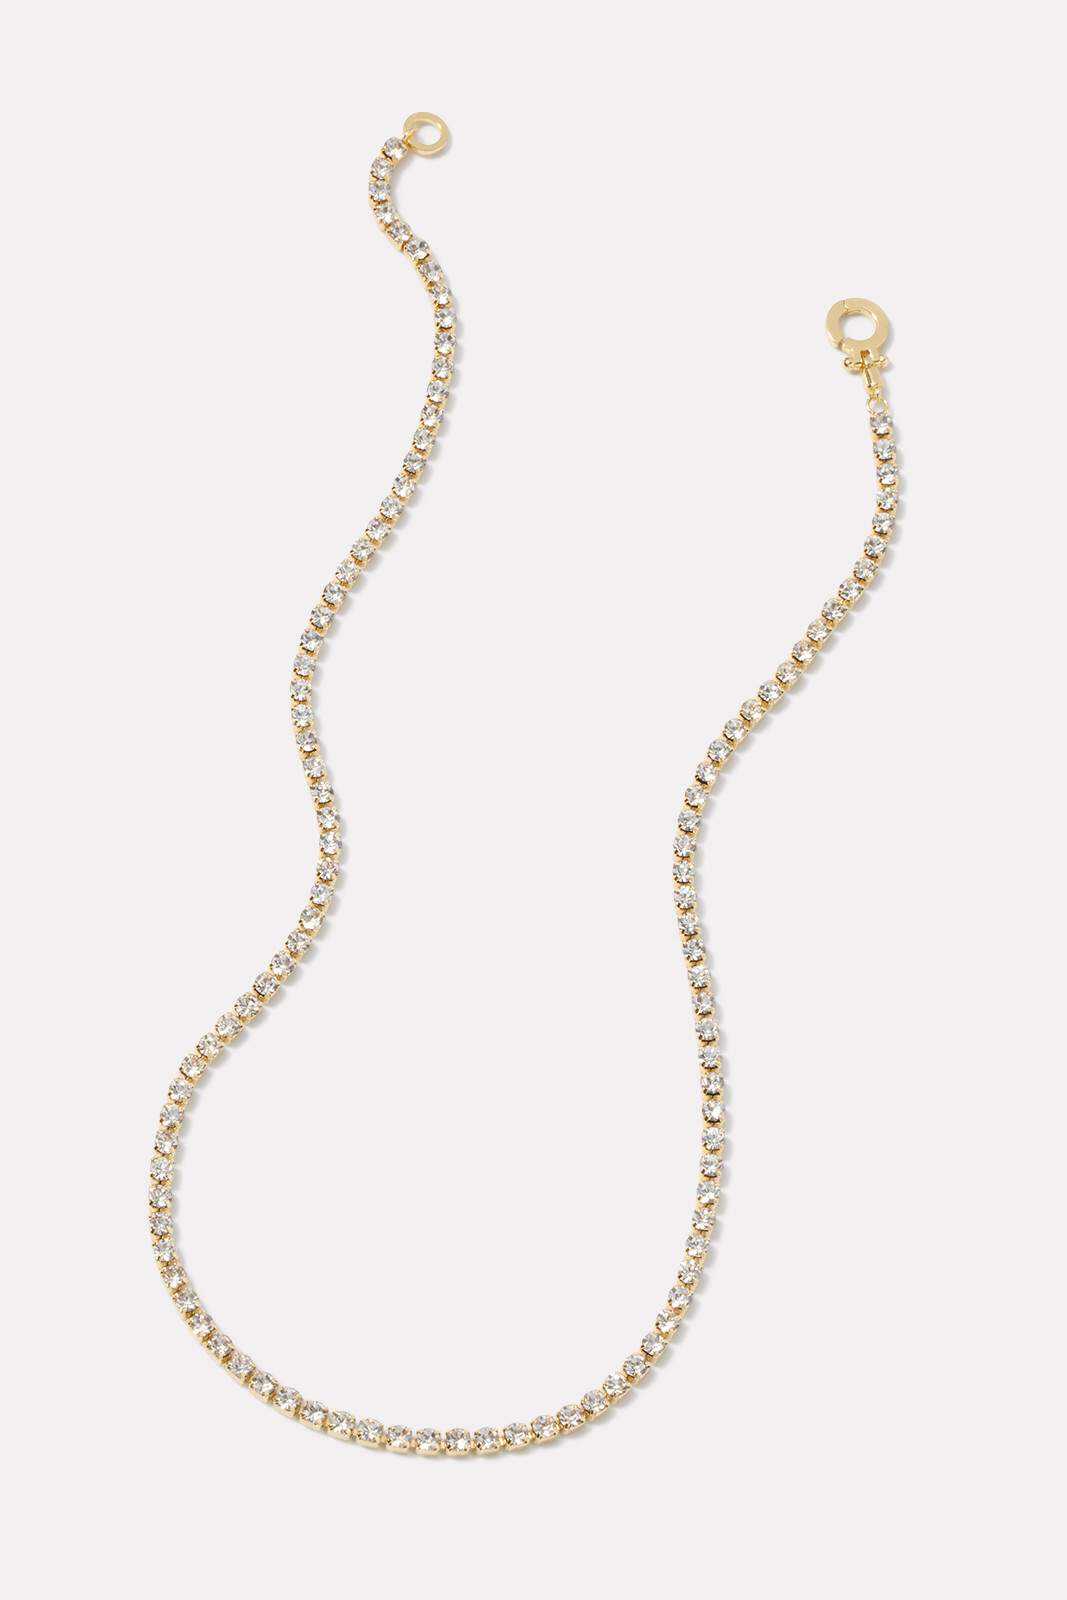 Parker Shimmer Clasp Necklace in Rhodium Plated, Women's by Gorjana